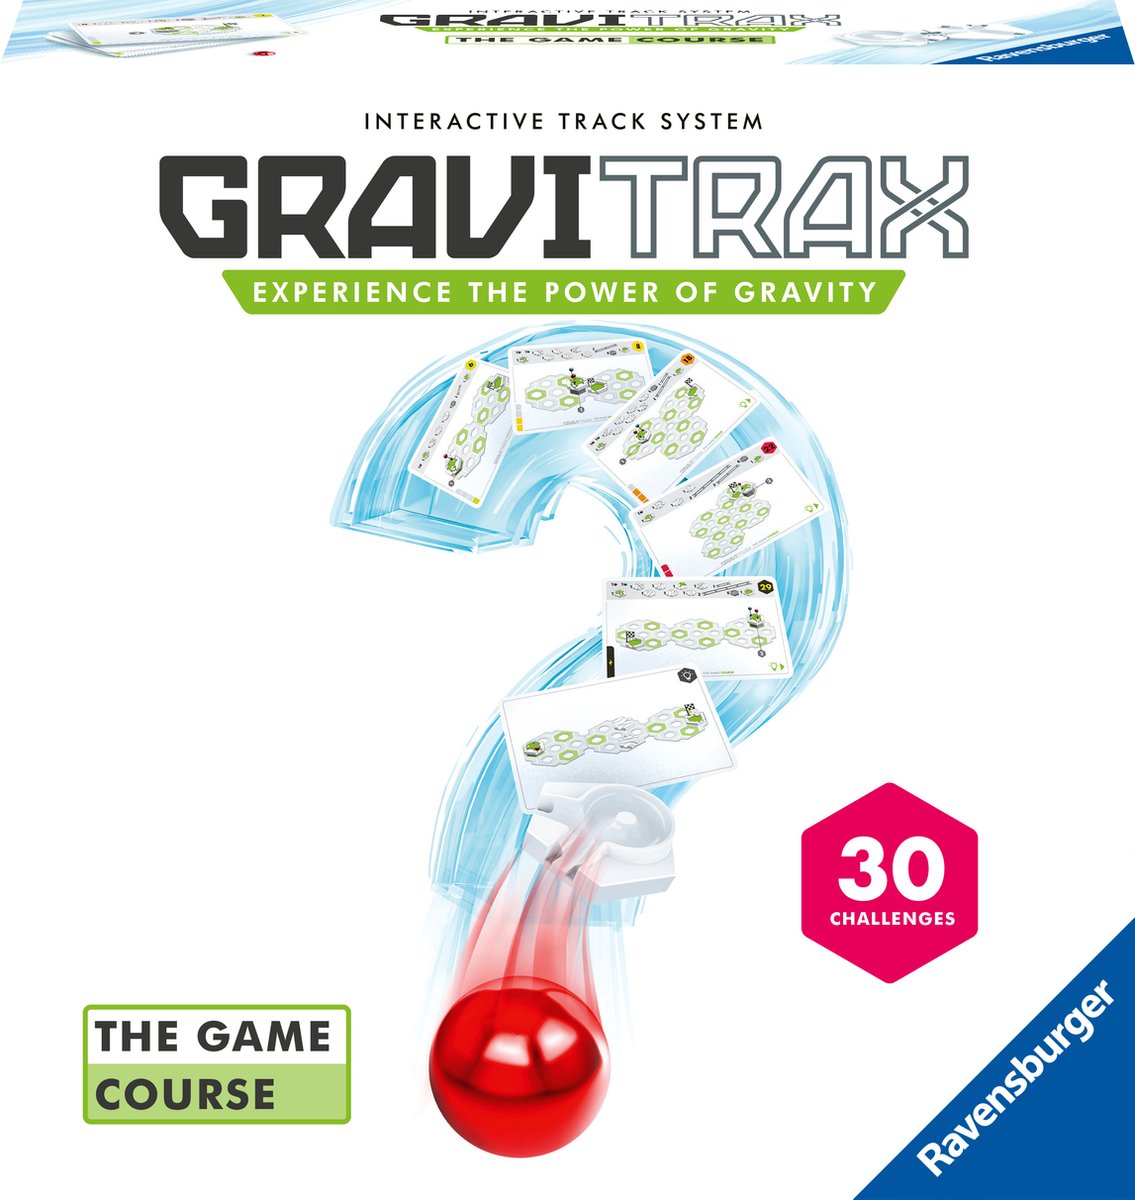  ® The Game: Course - 30 Challenges -  